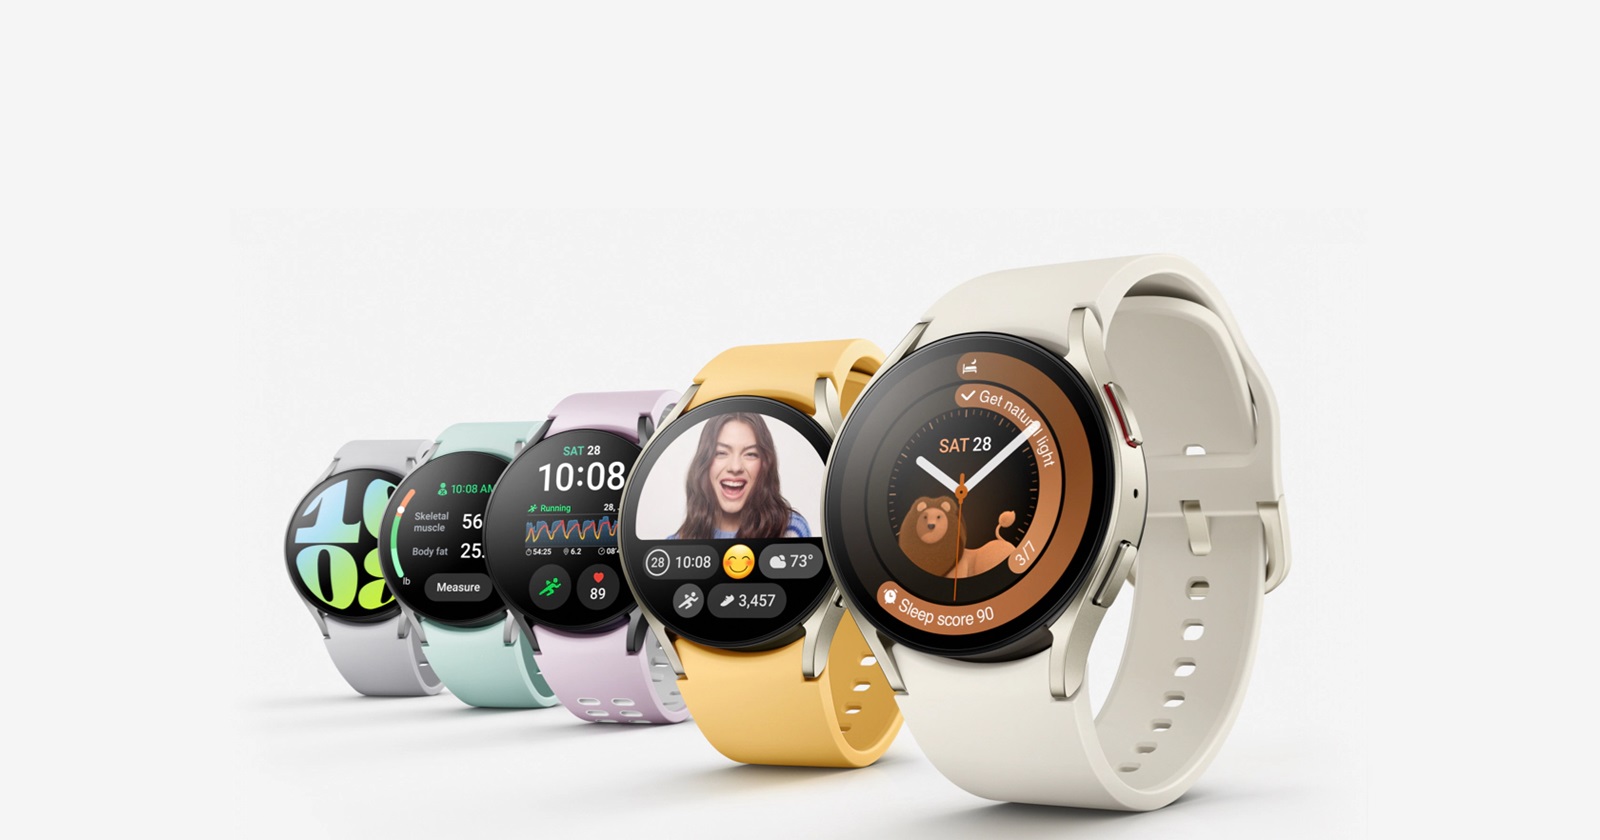 Galaxy Wearable app crashing for some Pixel & Samsung users, but there's a potential fix